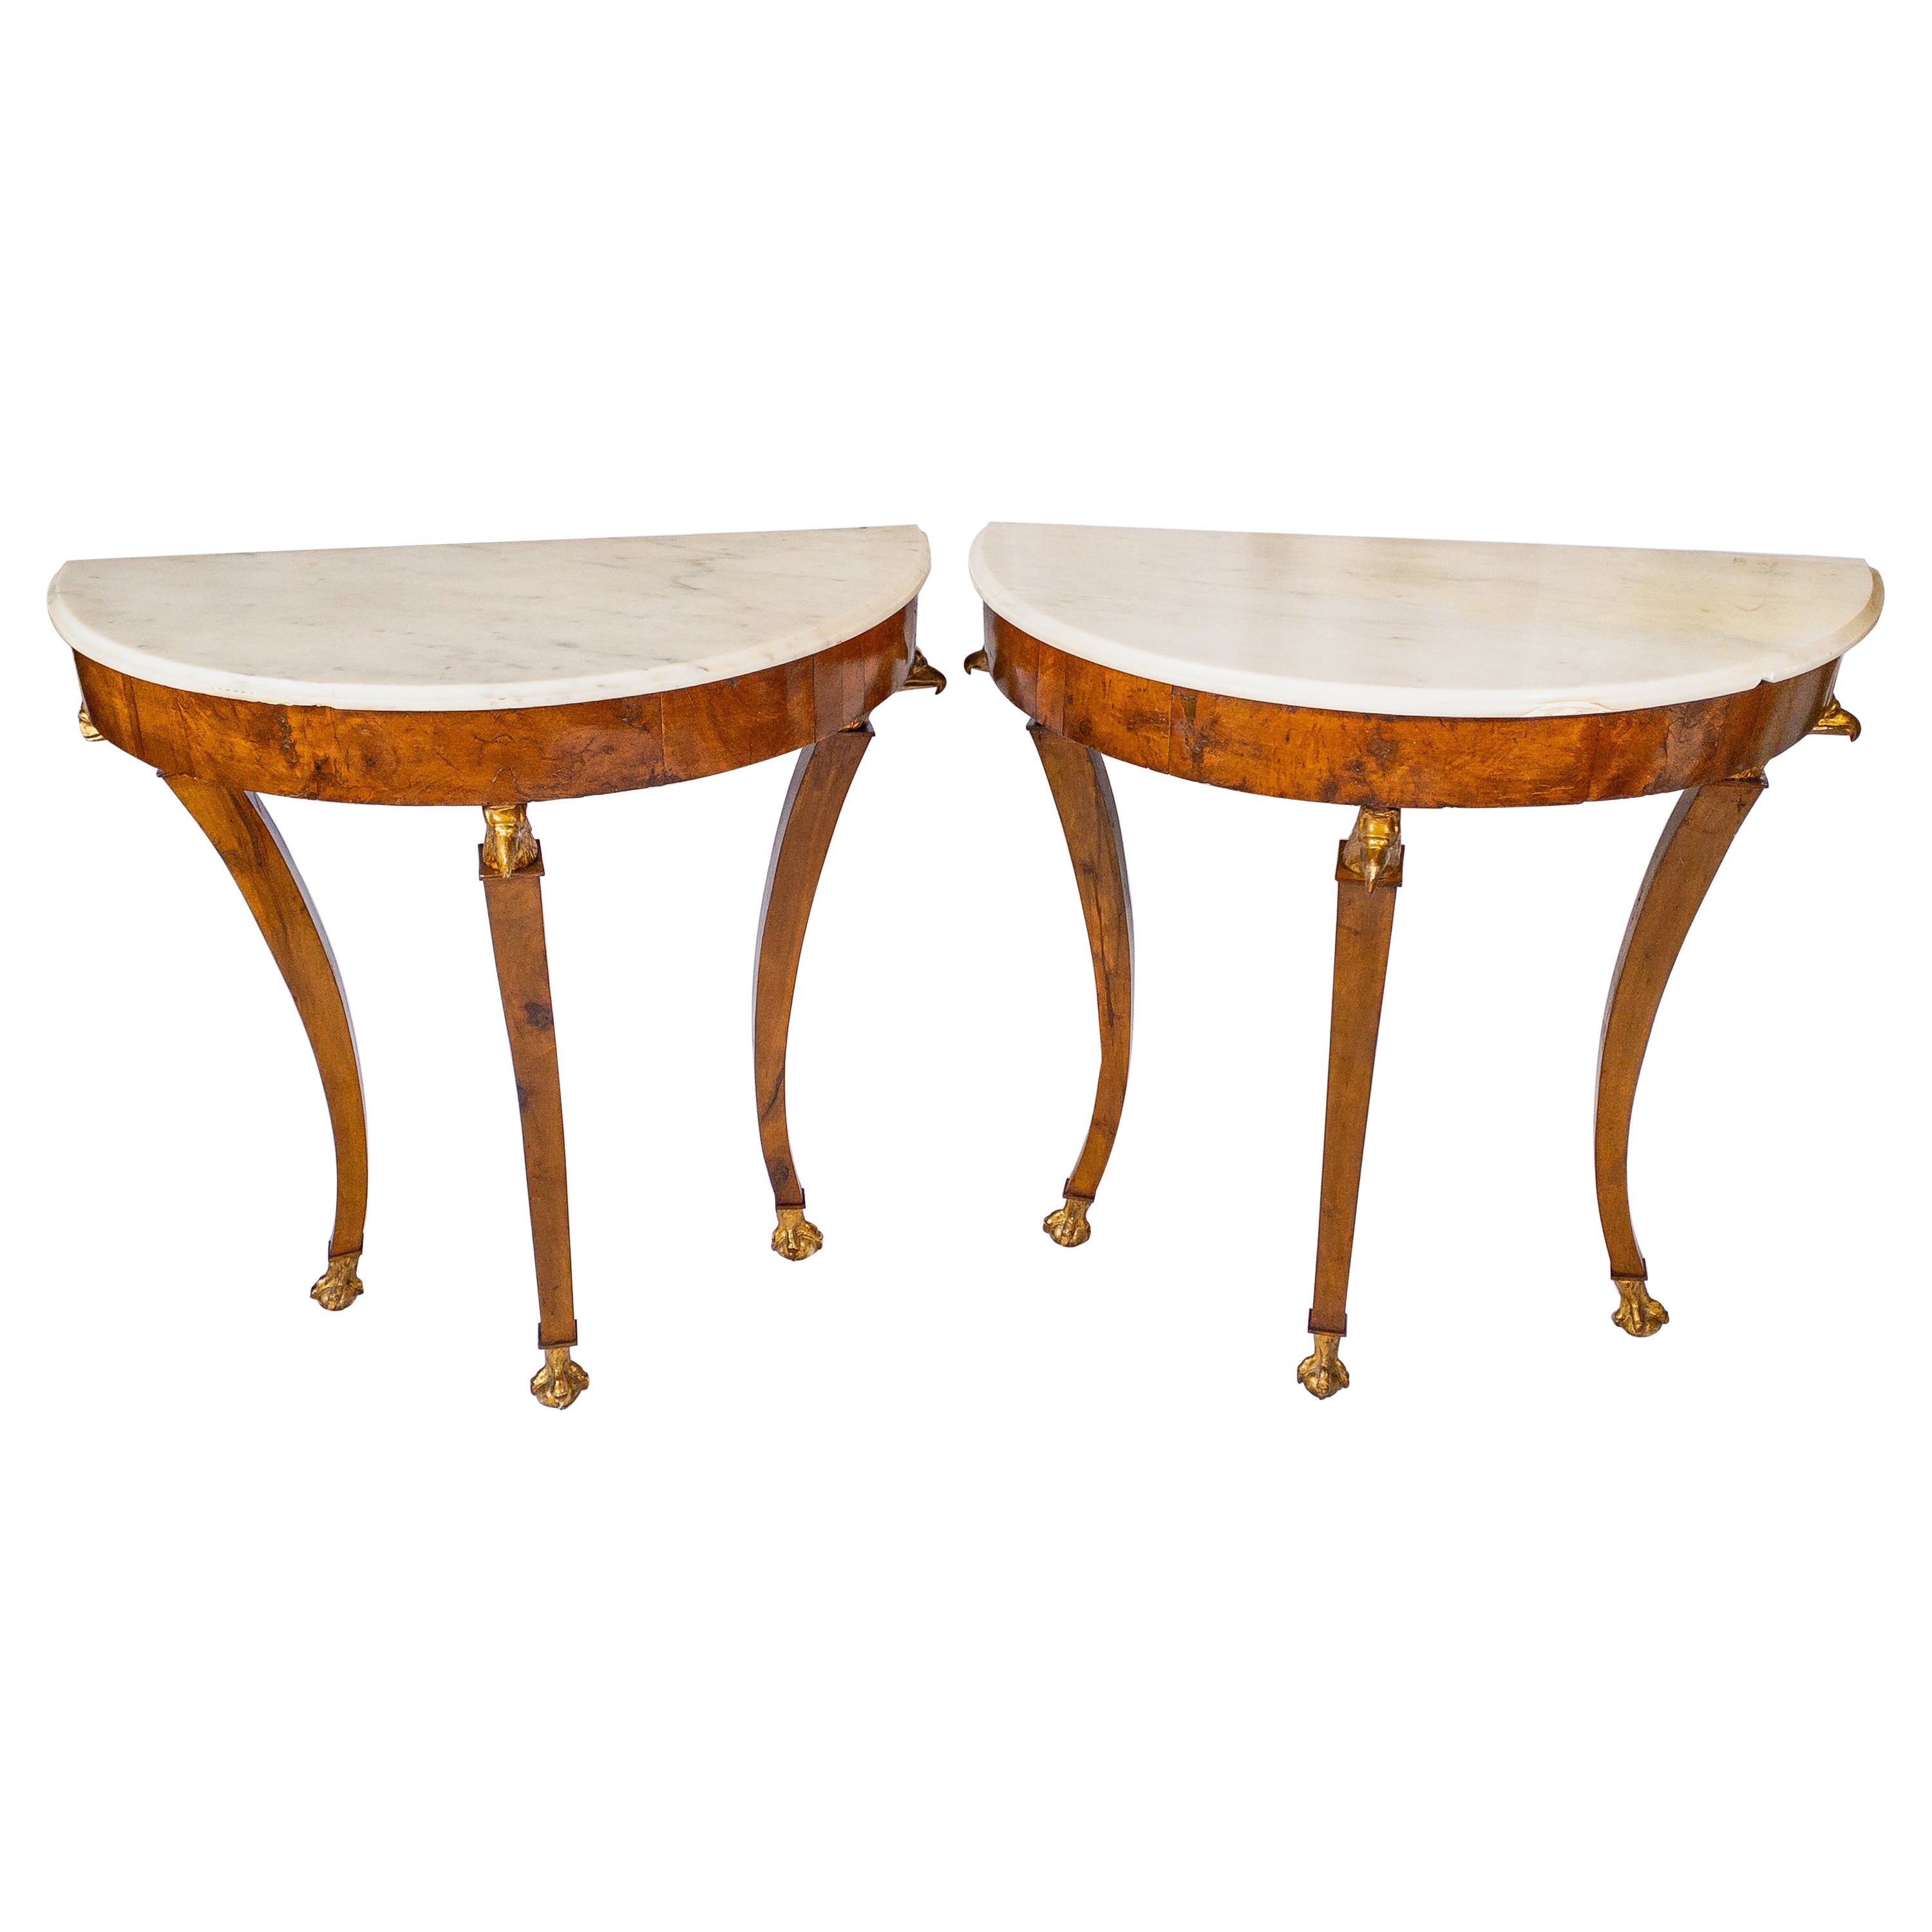 Pair of 18th Century Italian Marble Top Demi-lune Tables For Sale